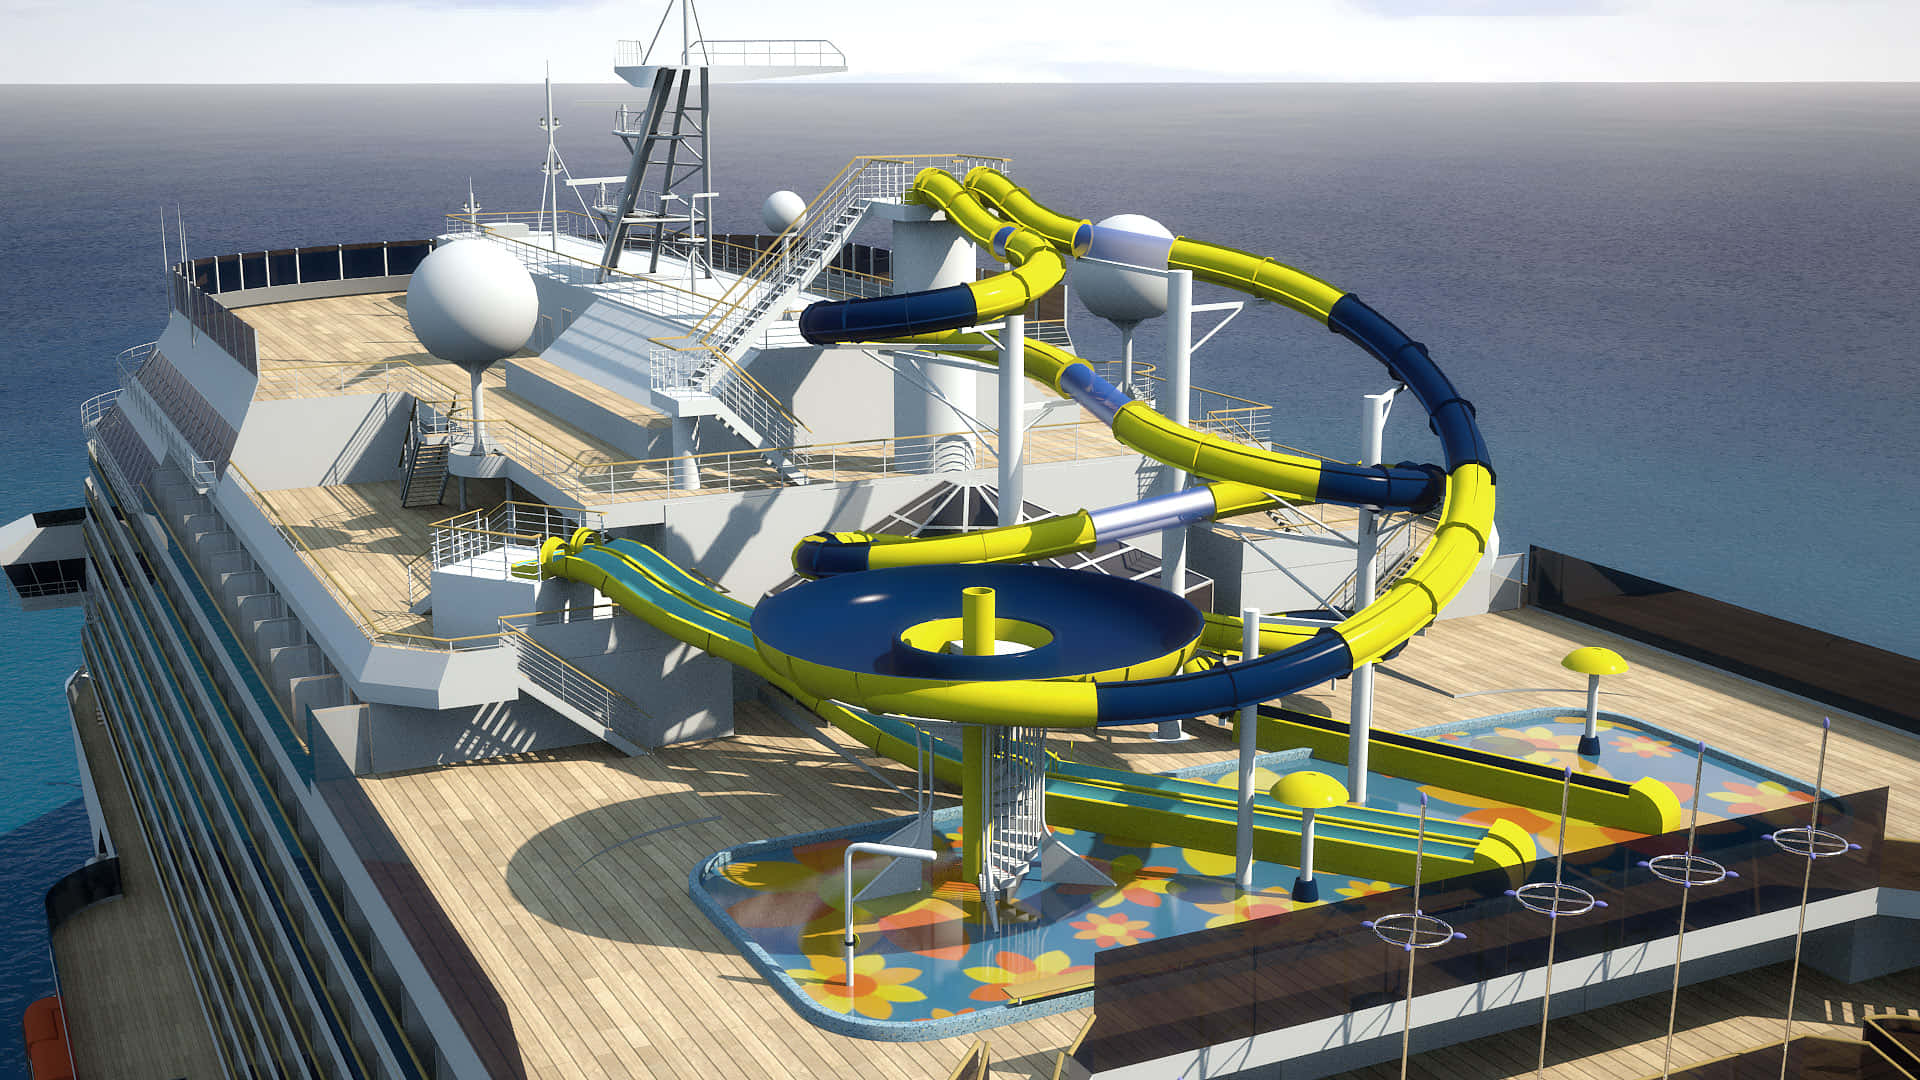 A Cruise Ship With A Water Slide On The Deck